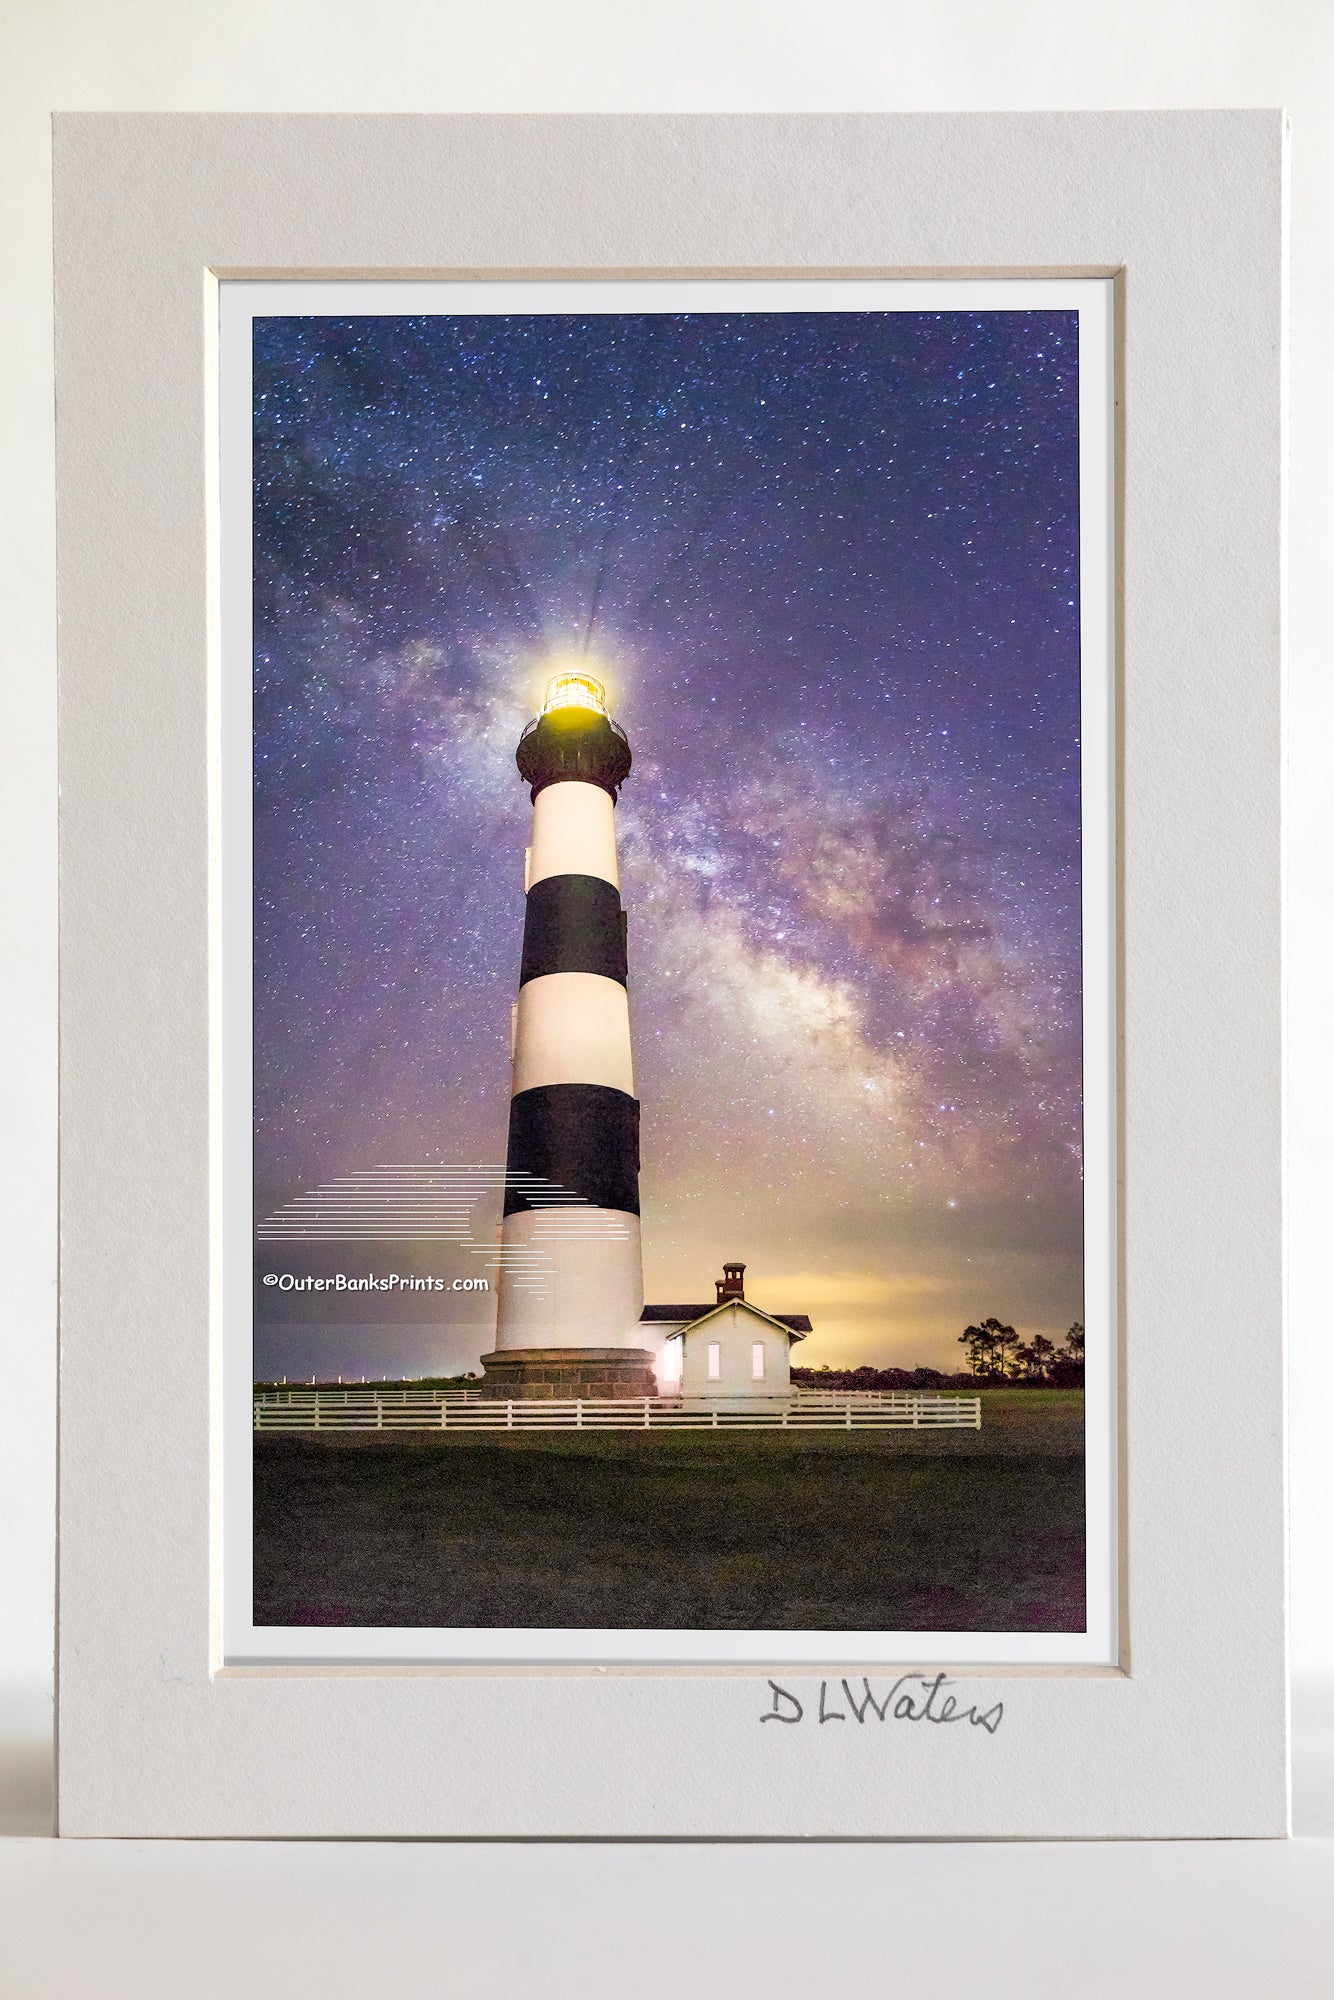 4 x 6 luster print in a 5 x 7 ivory mat of Bodie Island Lighthouse and a star filled sky including the Milky-way galaxy on the Outer Banks of North Carolina.